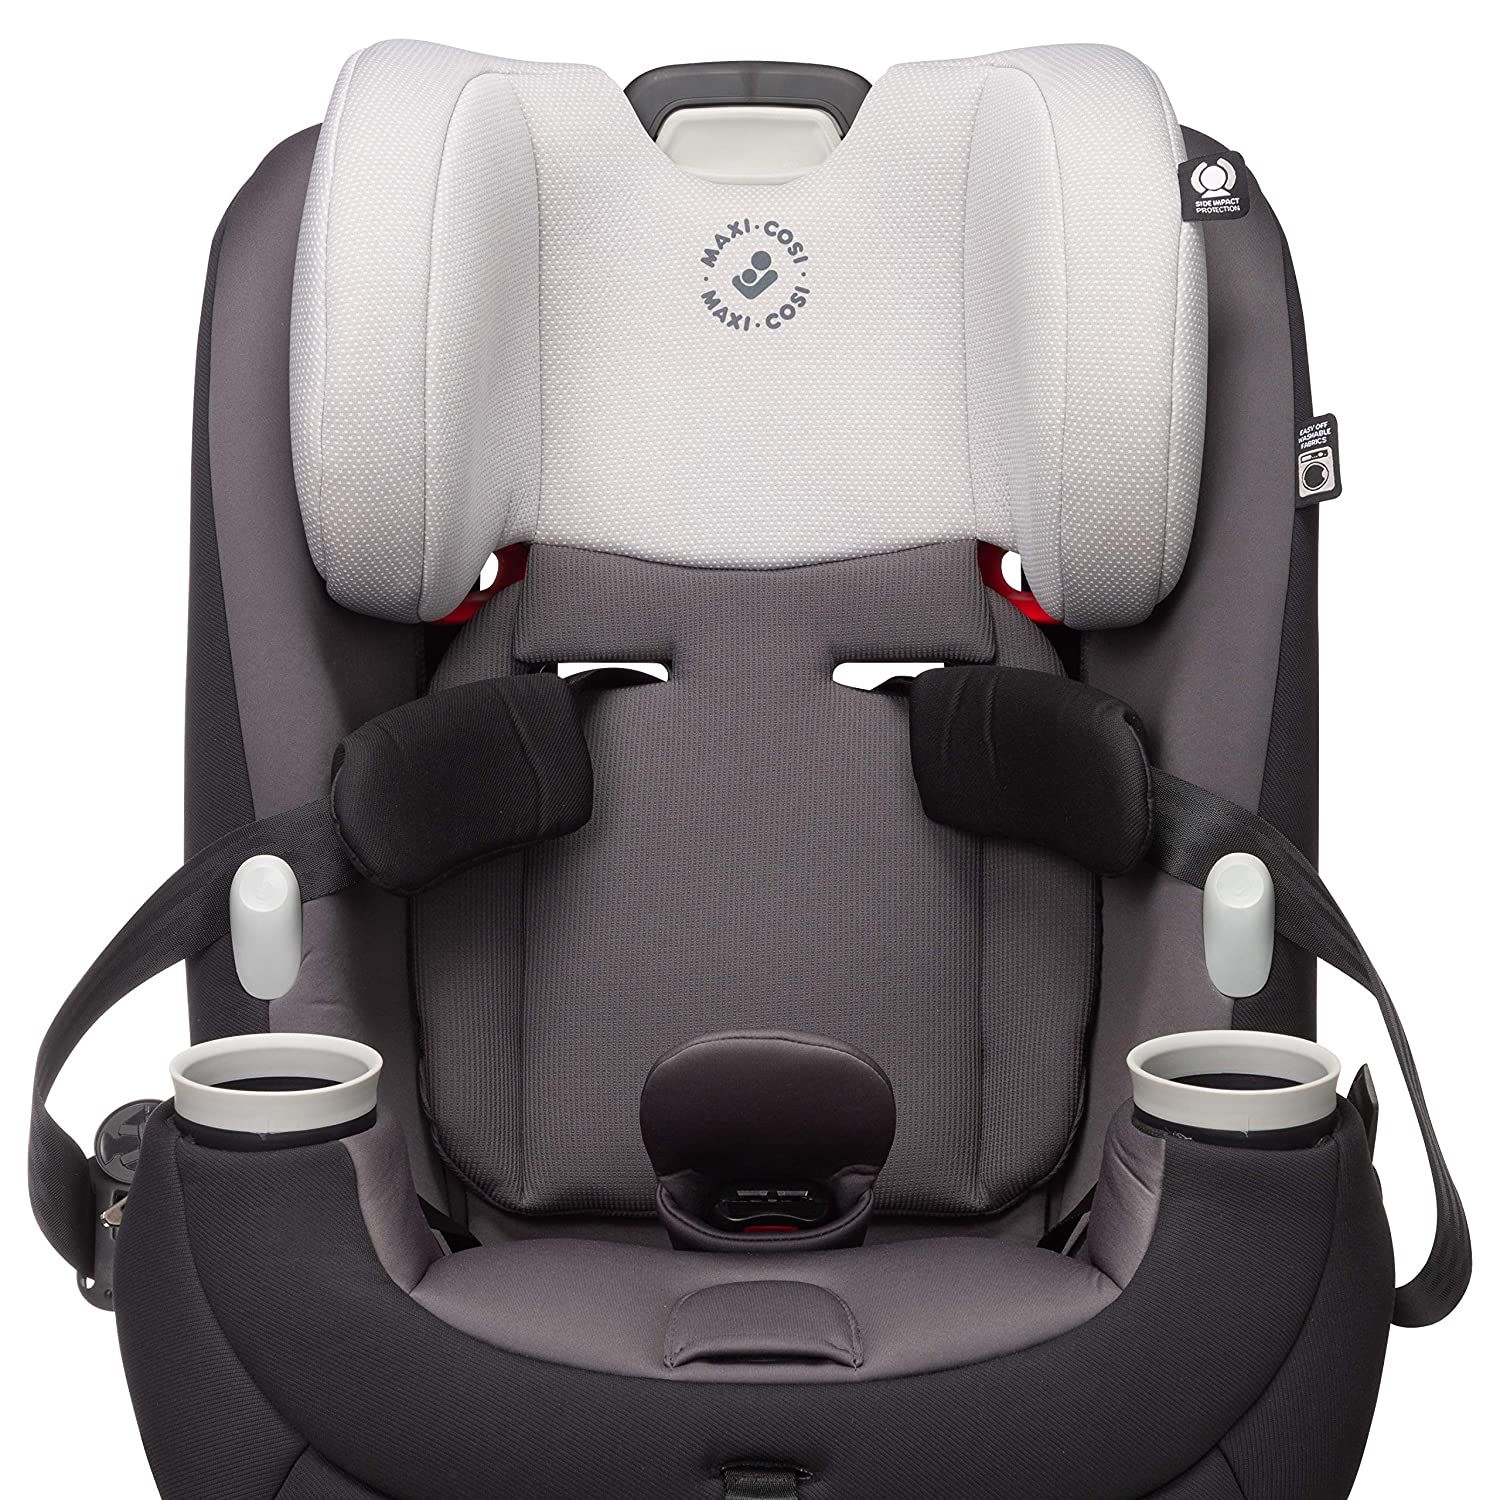 The Best Toddler Car Seats